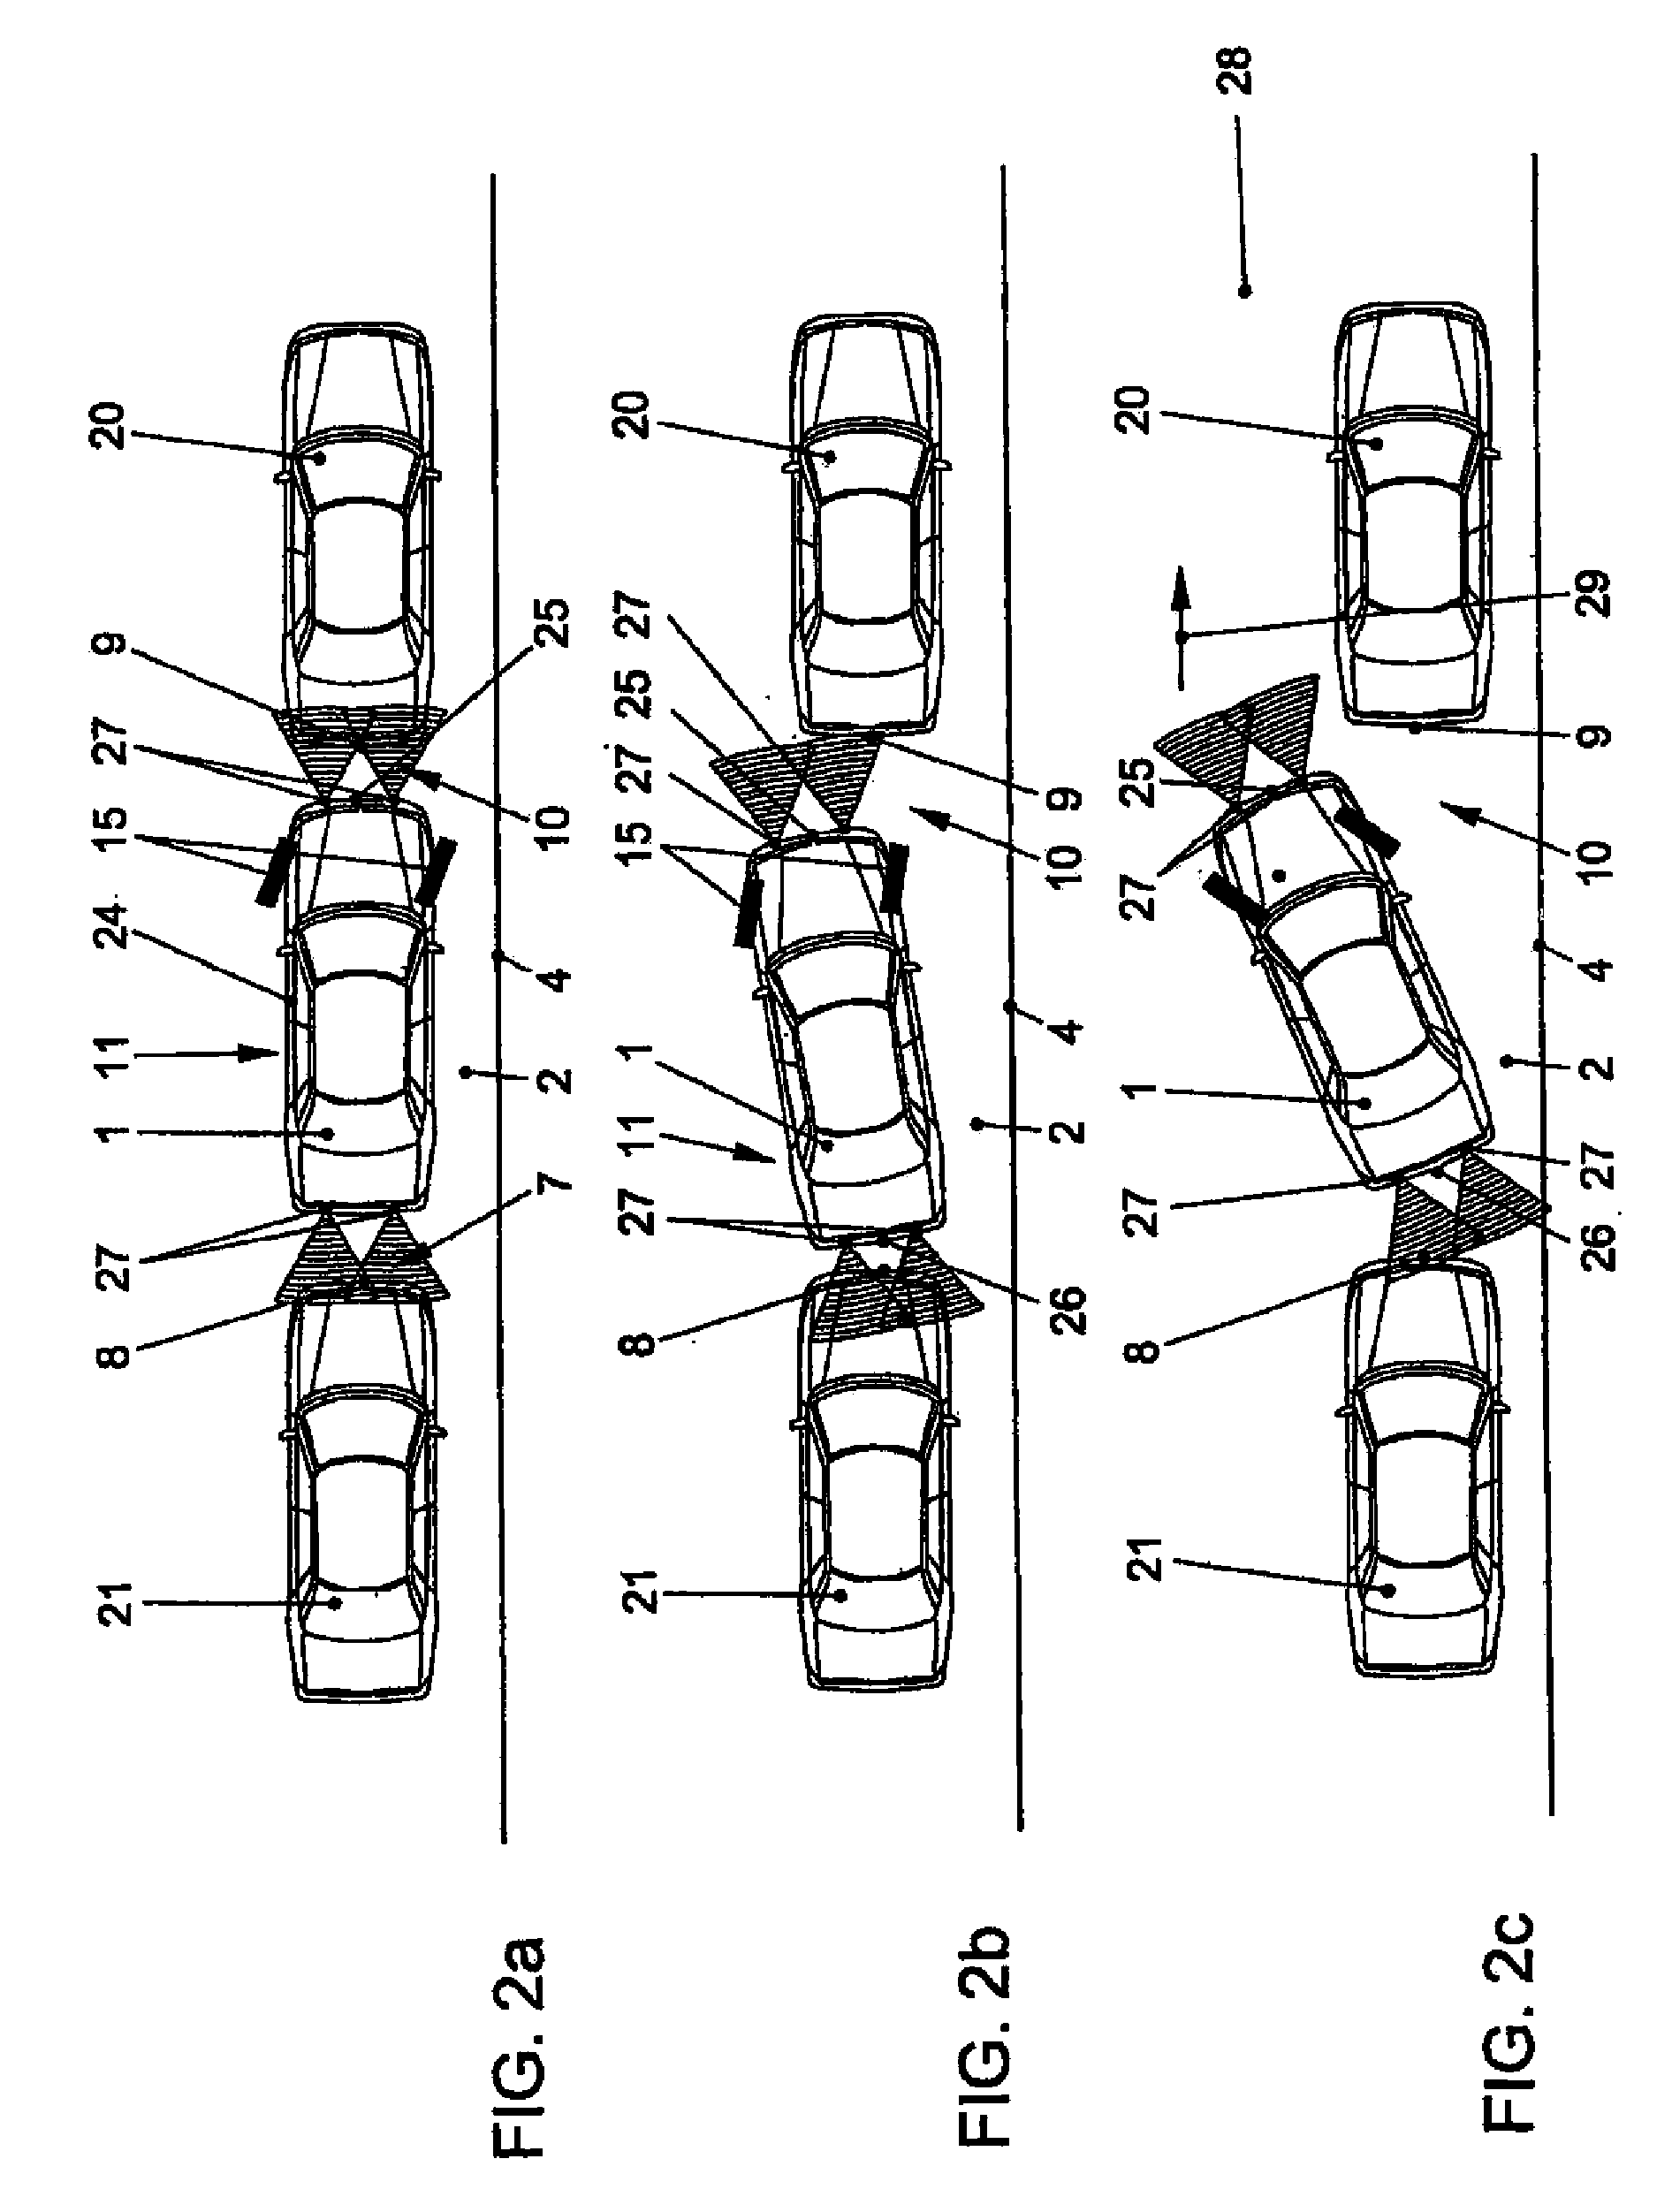 Park-steer assist system and method for operating a park-steer assist system